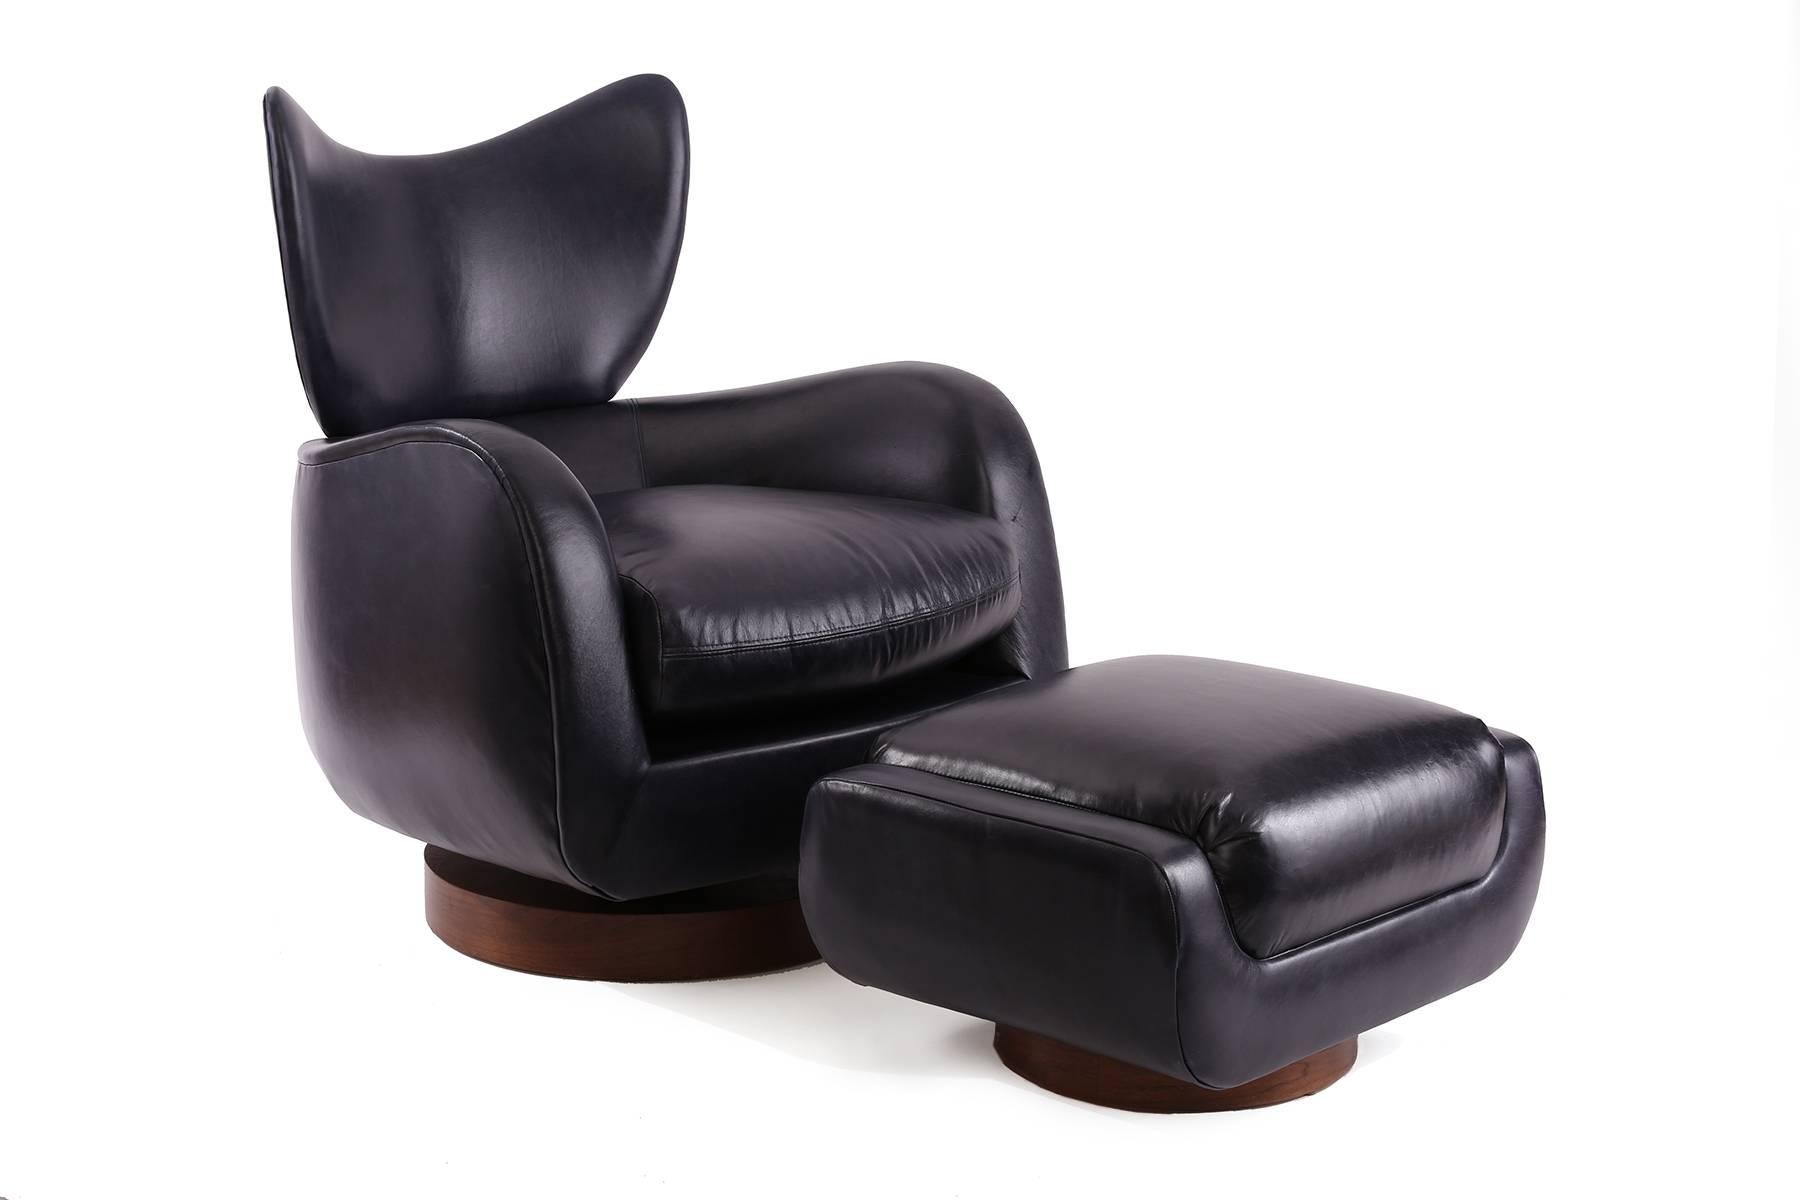 Pair of Vladimir Kagan for Directional swivel and reclining lounge chairs and ottoman, circa late 1970s. These sculptural examples have been newly upholstered in a patinated navy leather and sit atop circular spring loaded walnut bases.
Price is